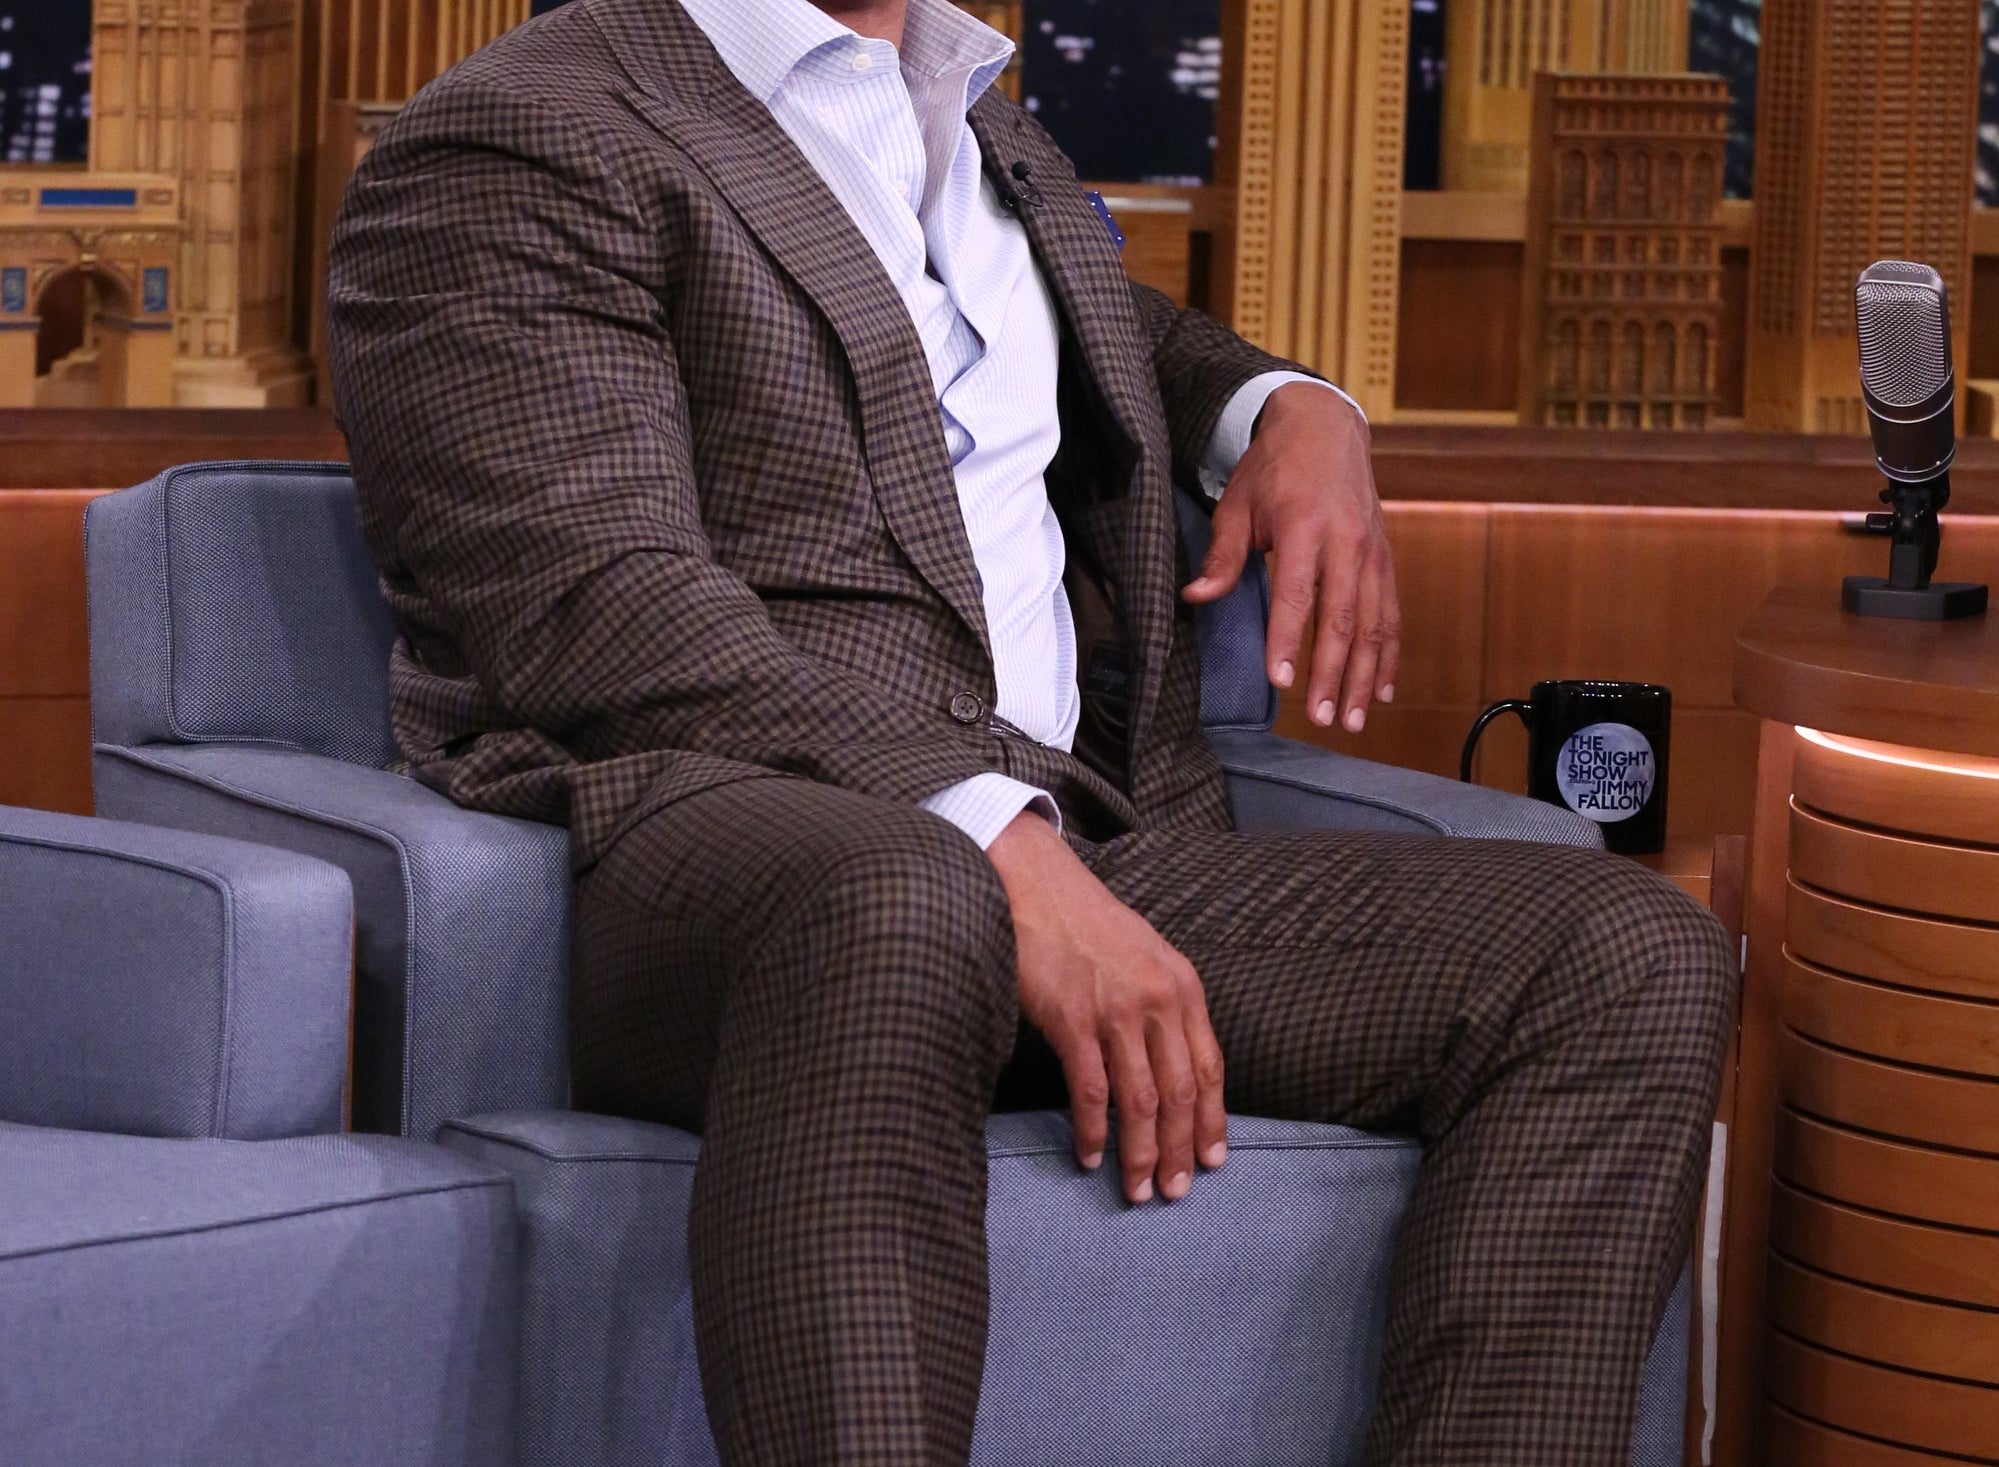 Dwayne laughs while on set at a night show.